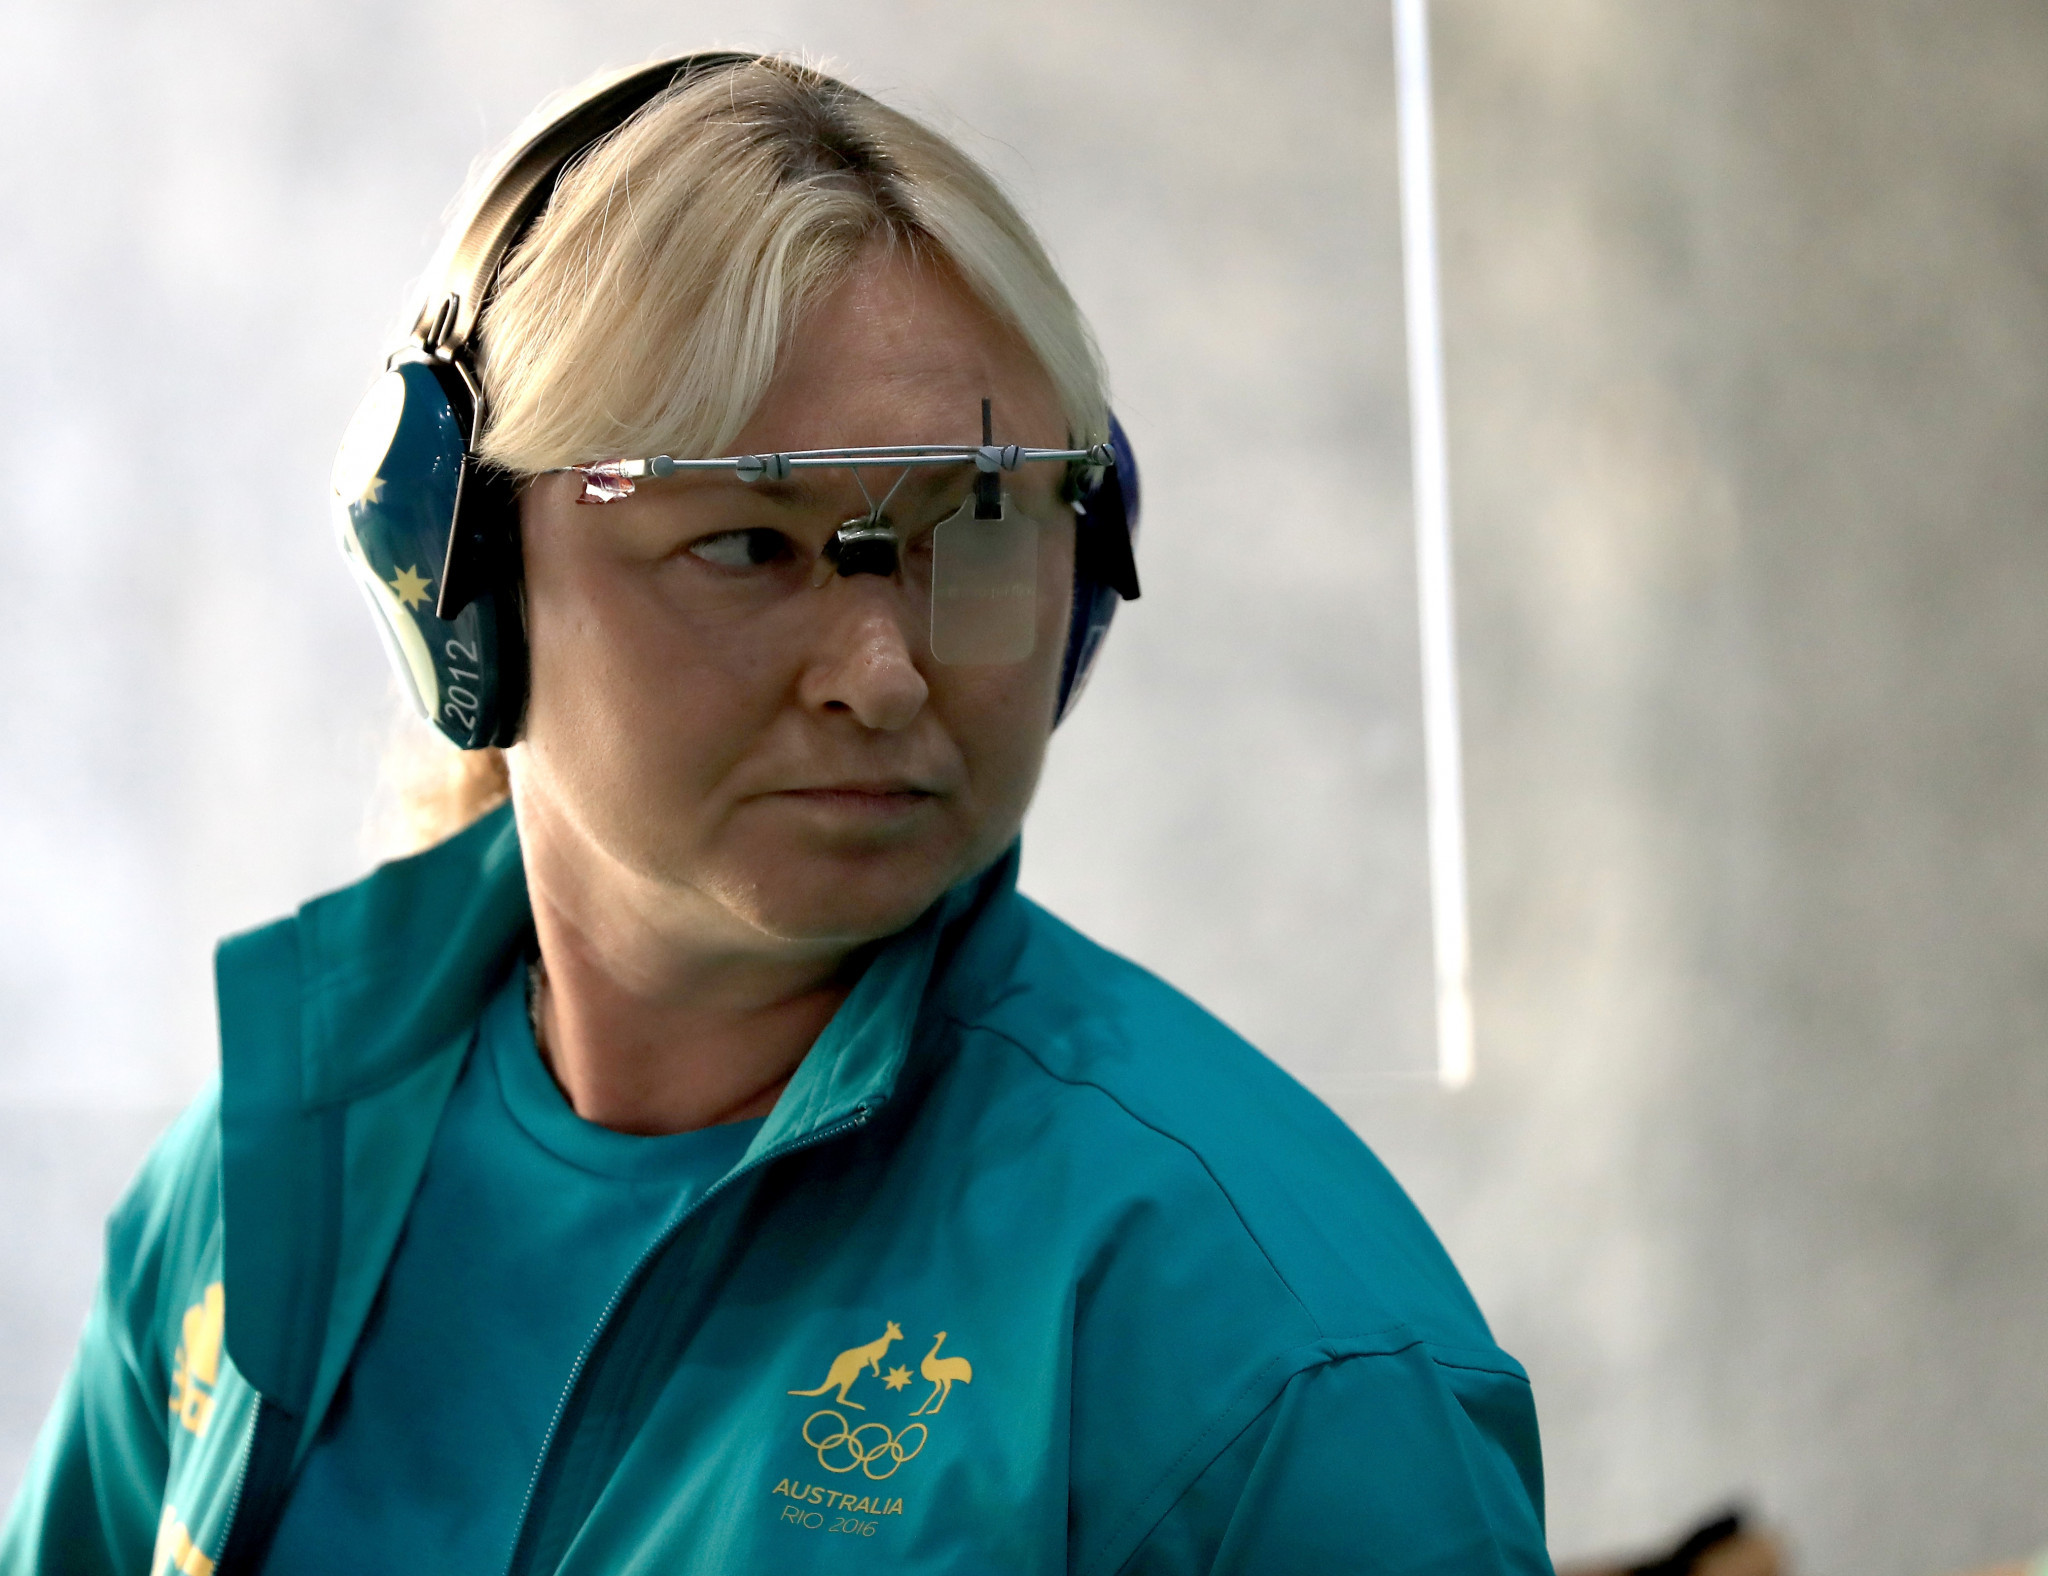 Belarusian-born Australian wins three gold medals at Oceania and Commonwealth Shooting Federations' Championships